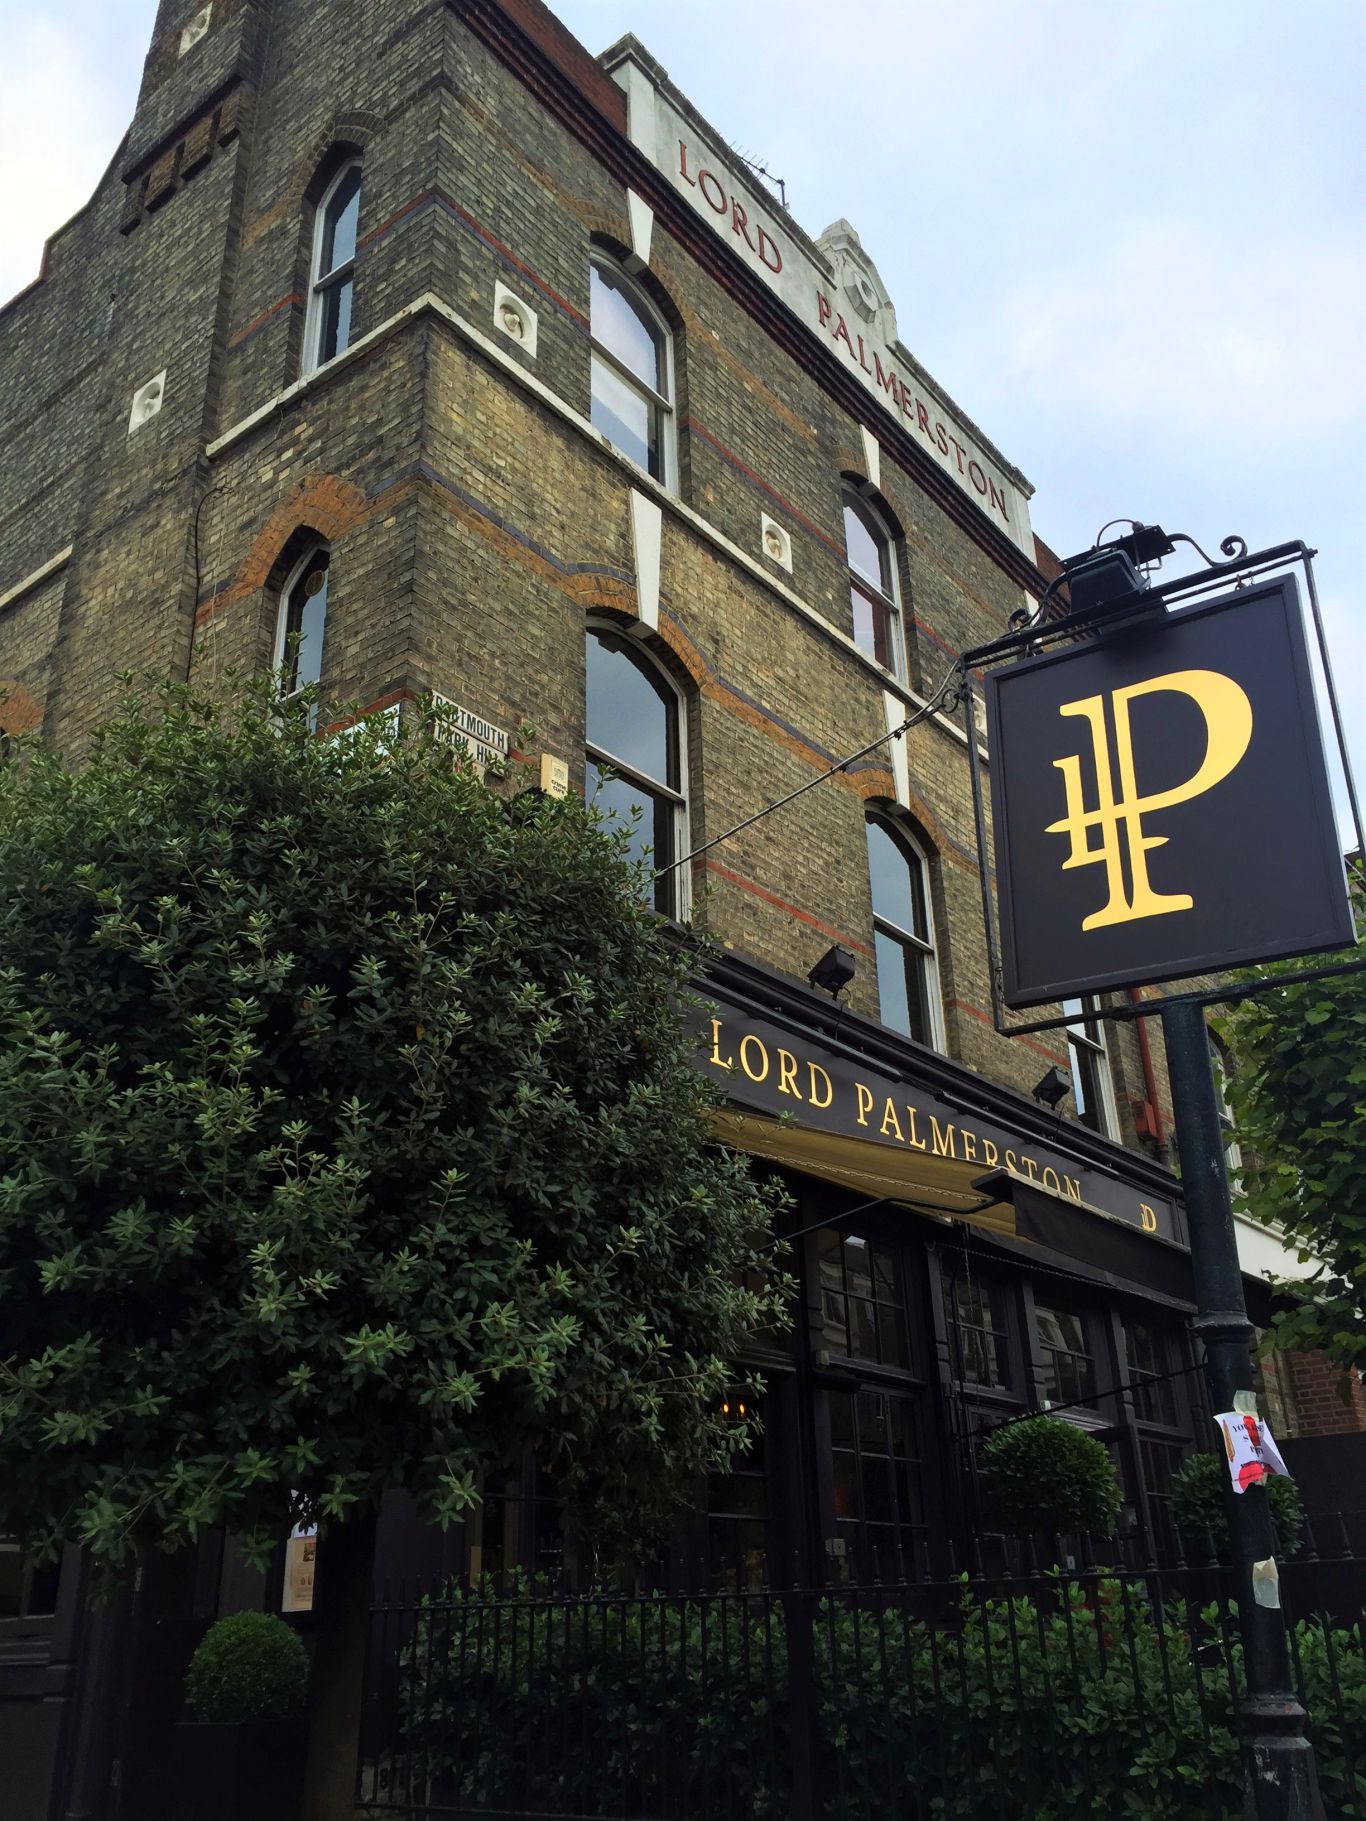 Imposing: the Lord P is a towering presence on the hill up to Highgate. Photo: SE